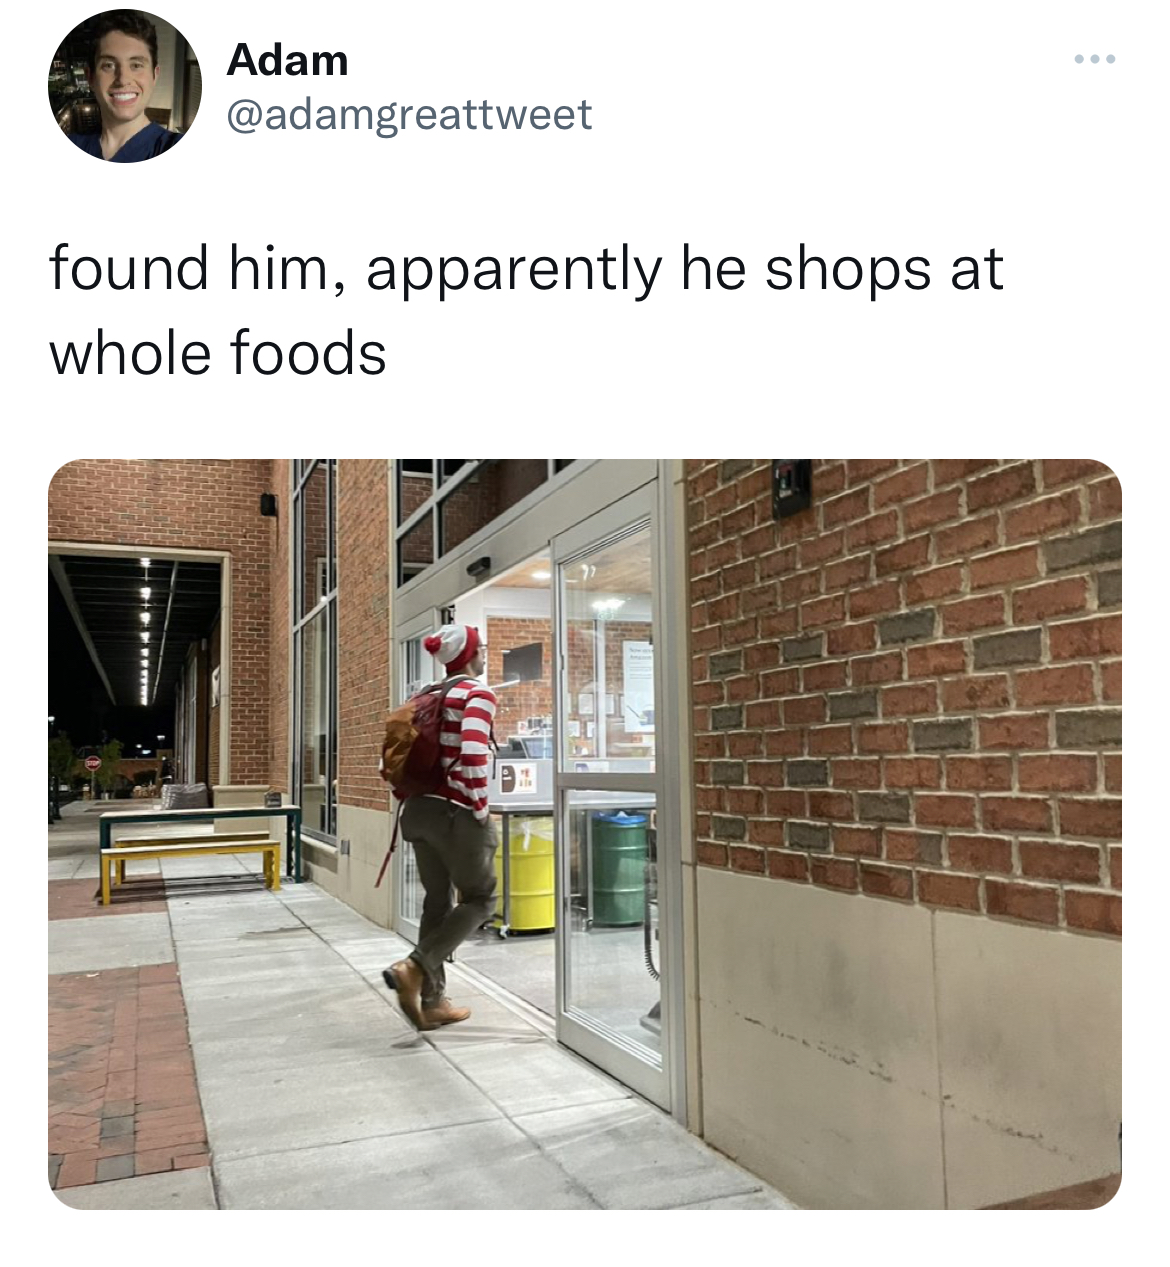 Savage and funny tweets - wall - Adam found him, apparently he shops at whole foods Scon